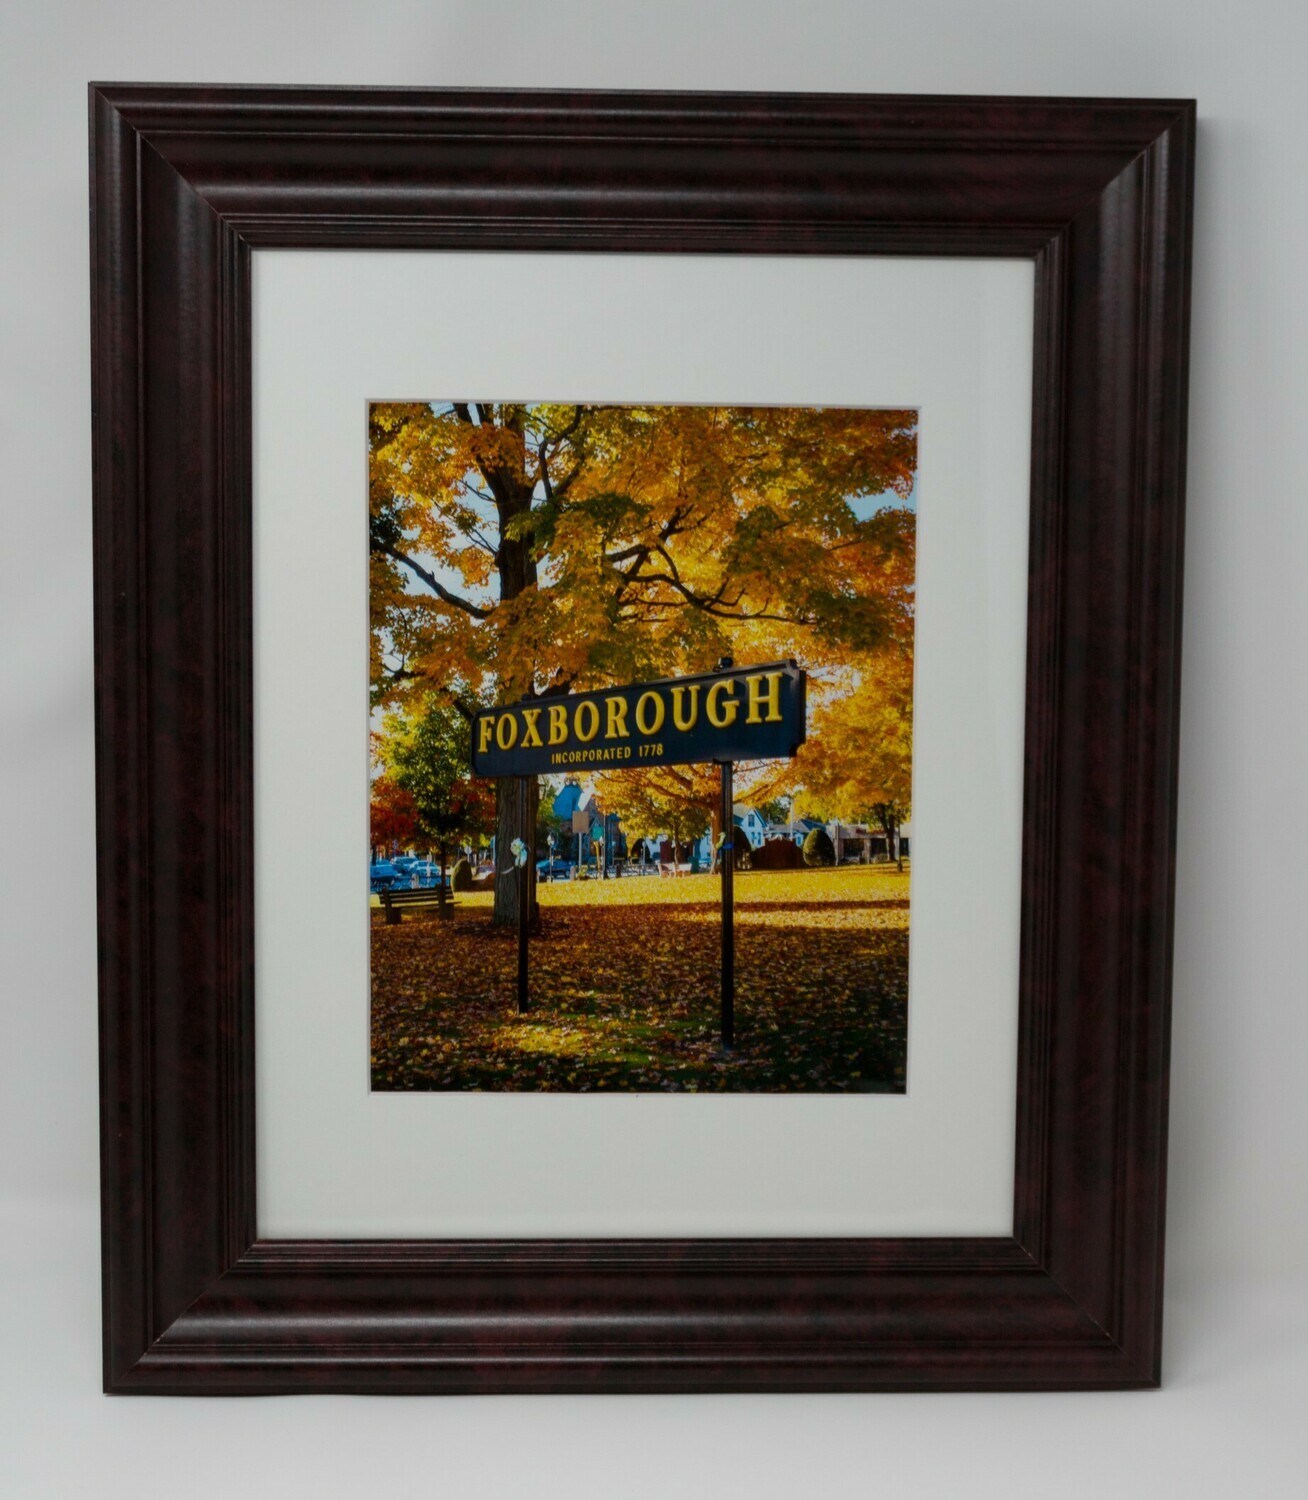 11"x14"Matted and Framed Photo Image of the Iconic Foxboro Sign in Autumn Colors